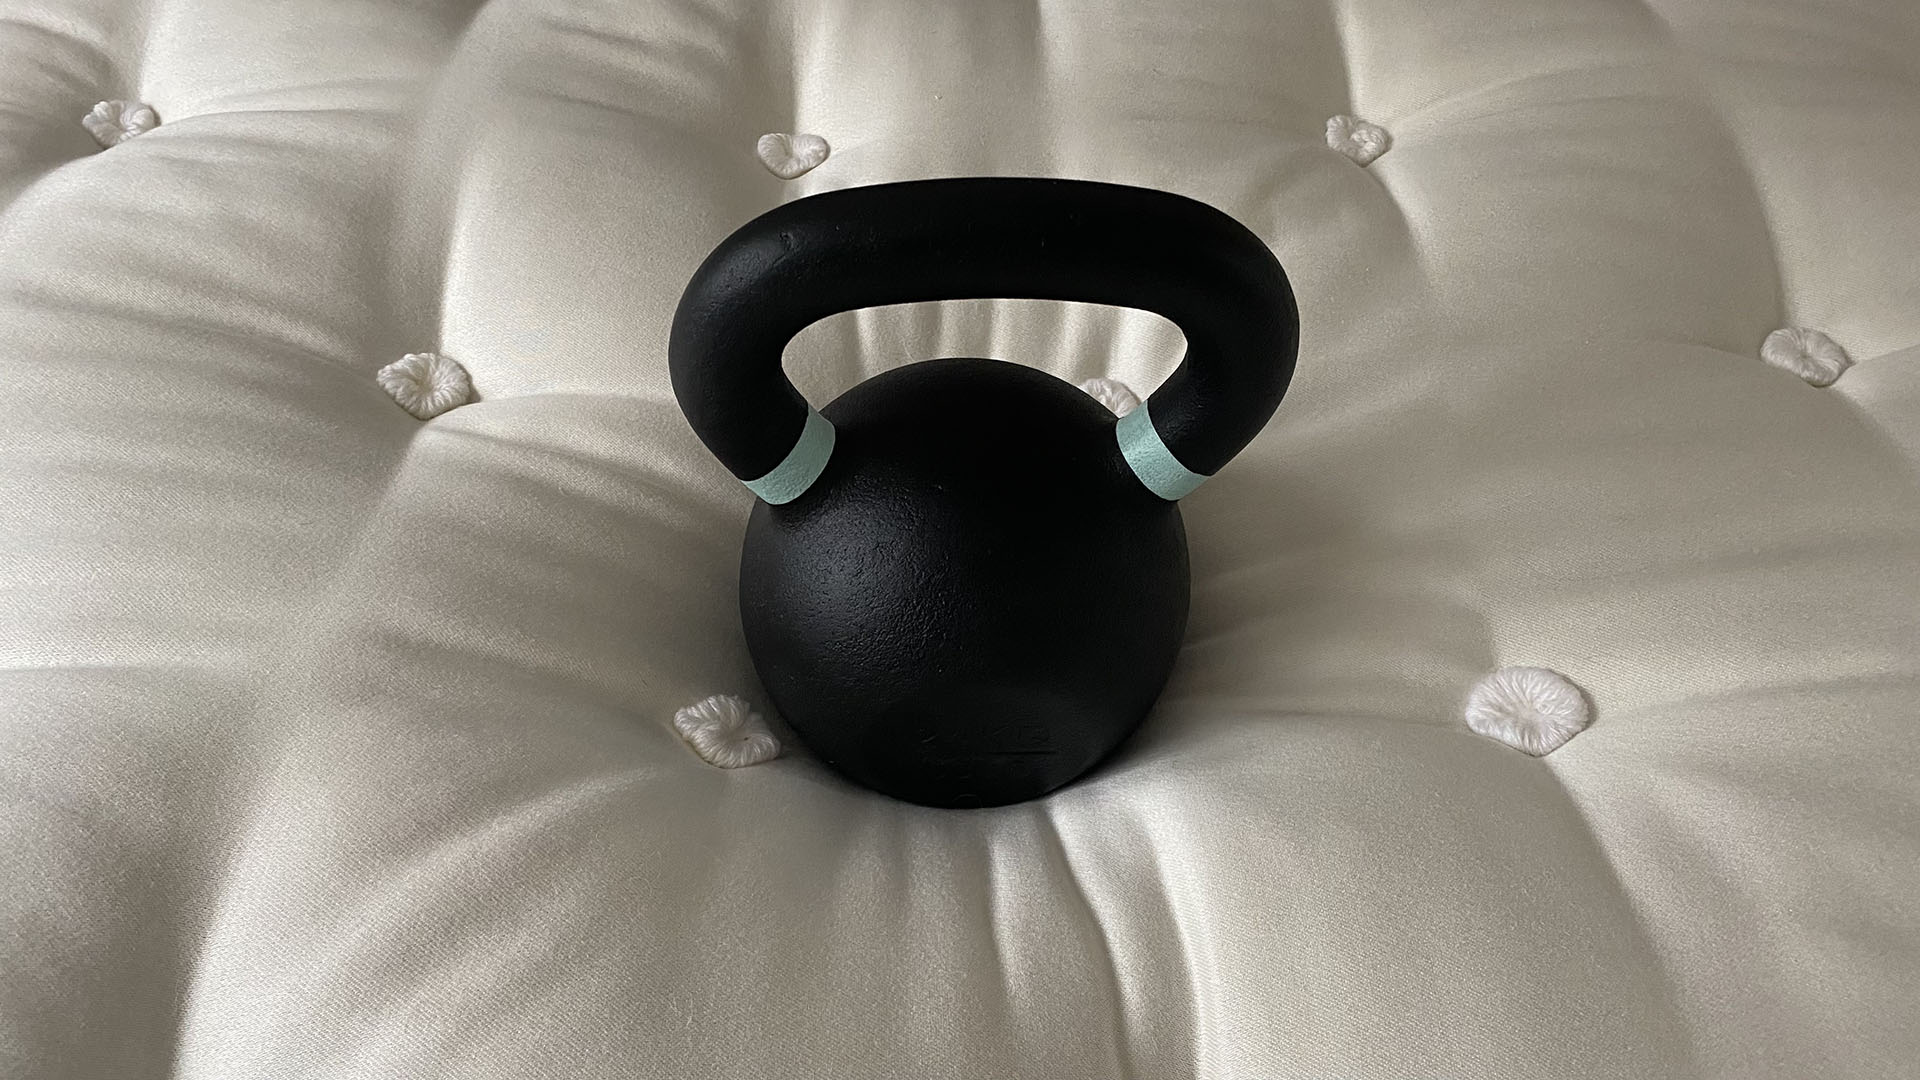 A 24kg kettlebell sitting on the center of the Simba Earth Escape mattress, demonstrating pressure relief